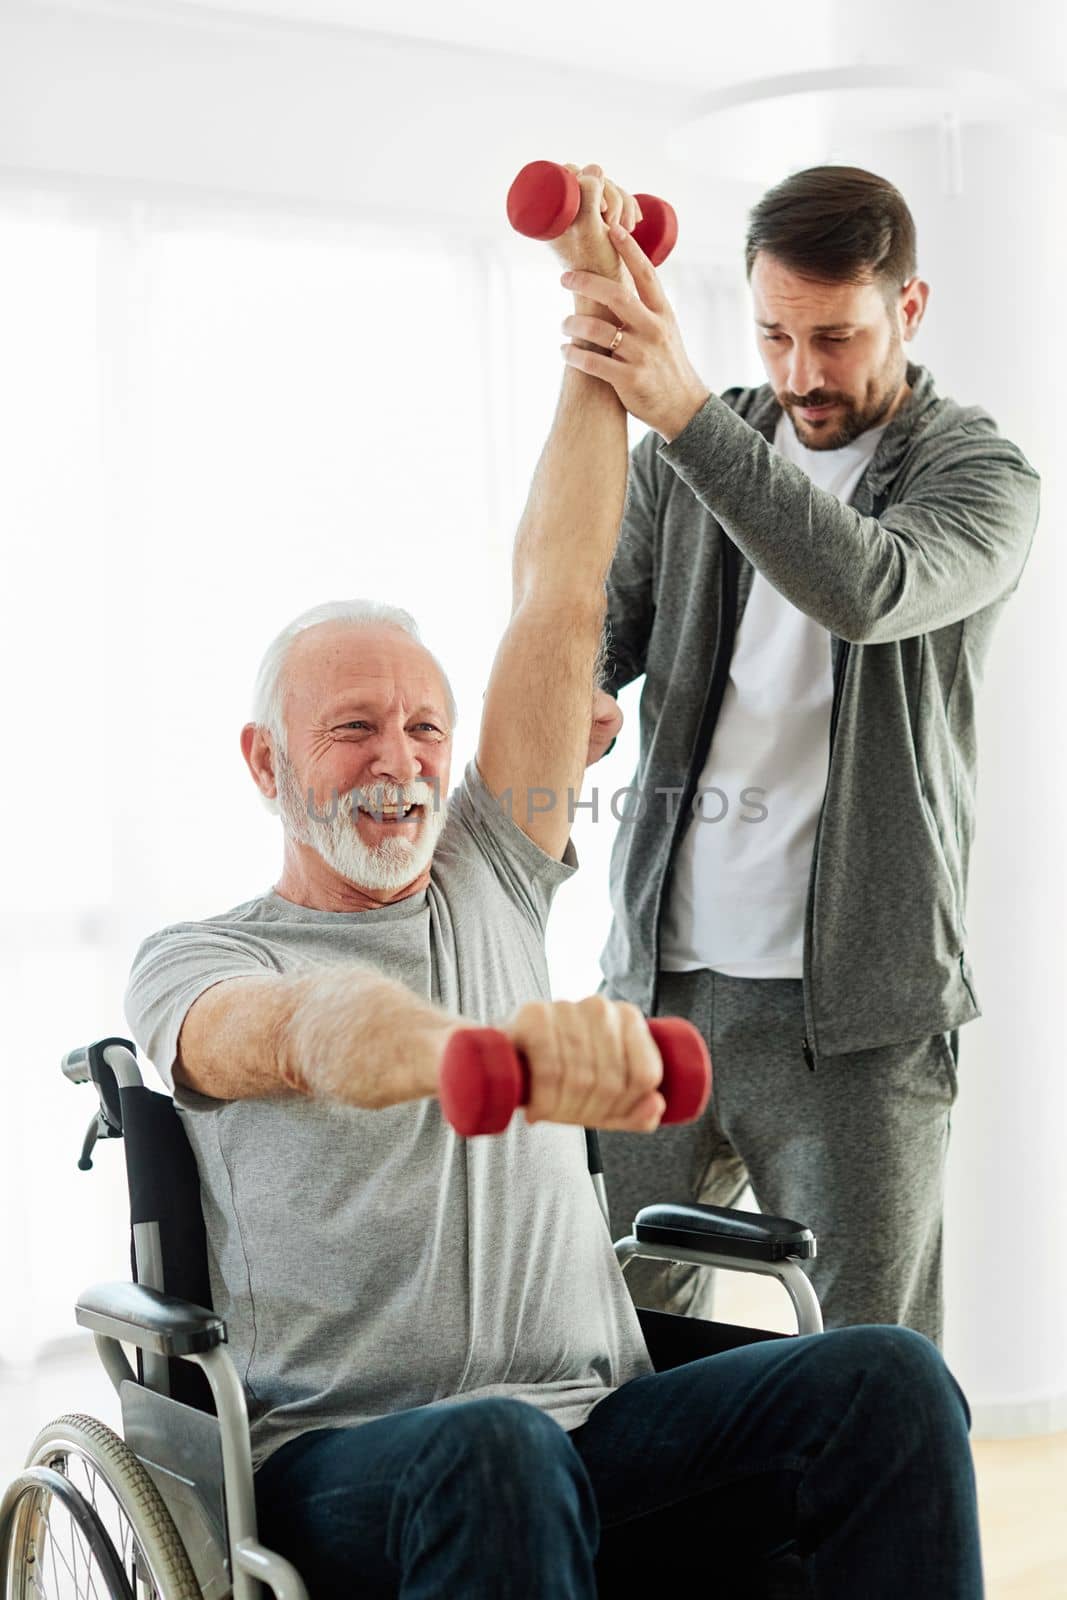 Doctor or nurse ot physiotherapist caregiver exercise with senior man at clinic or nursing home